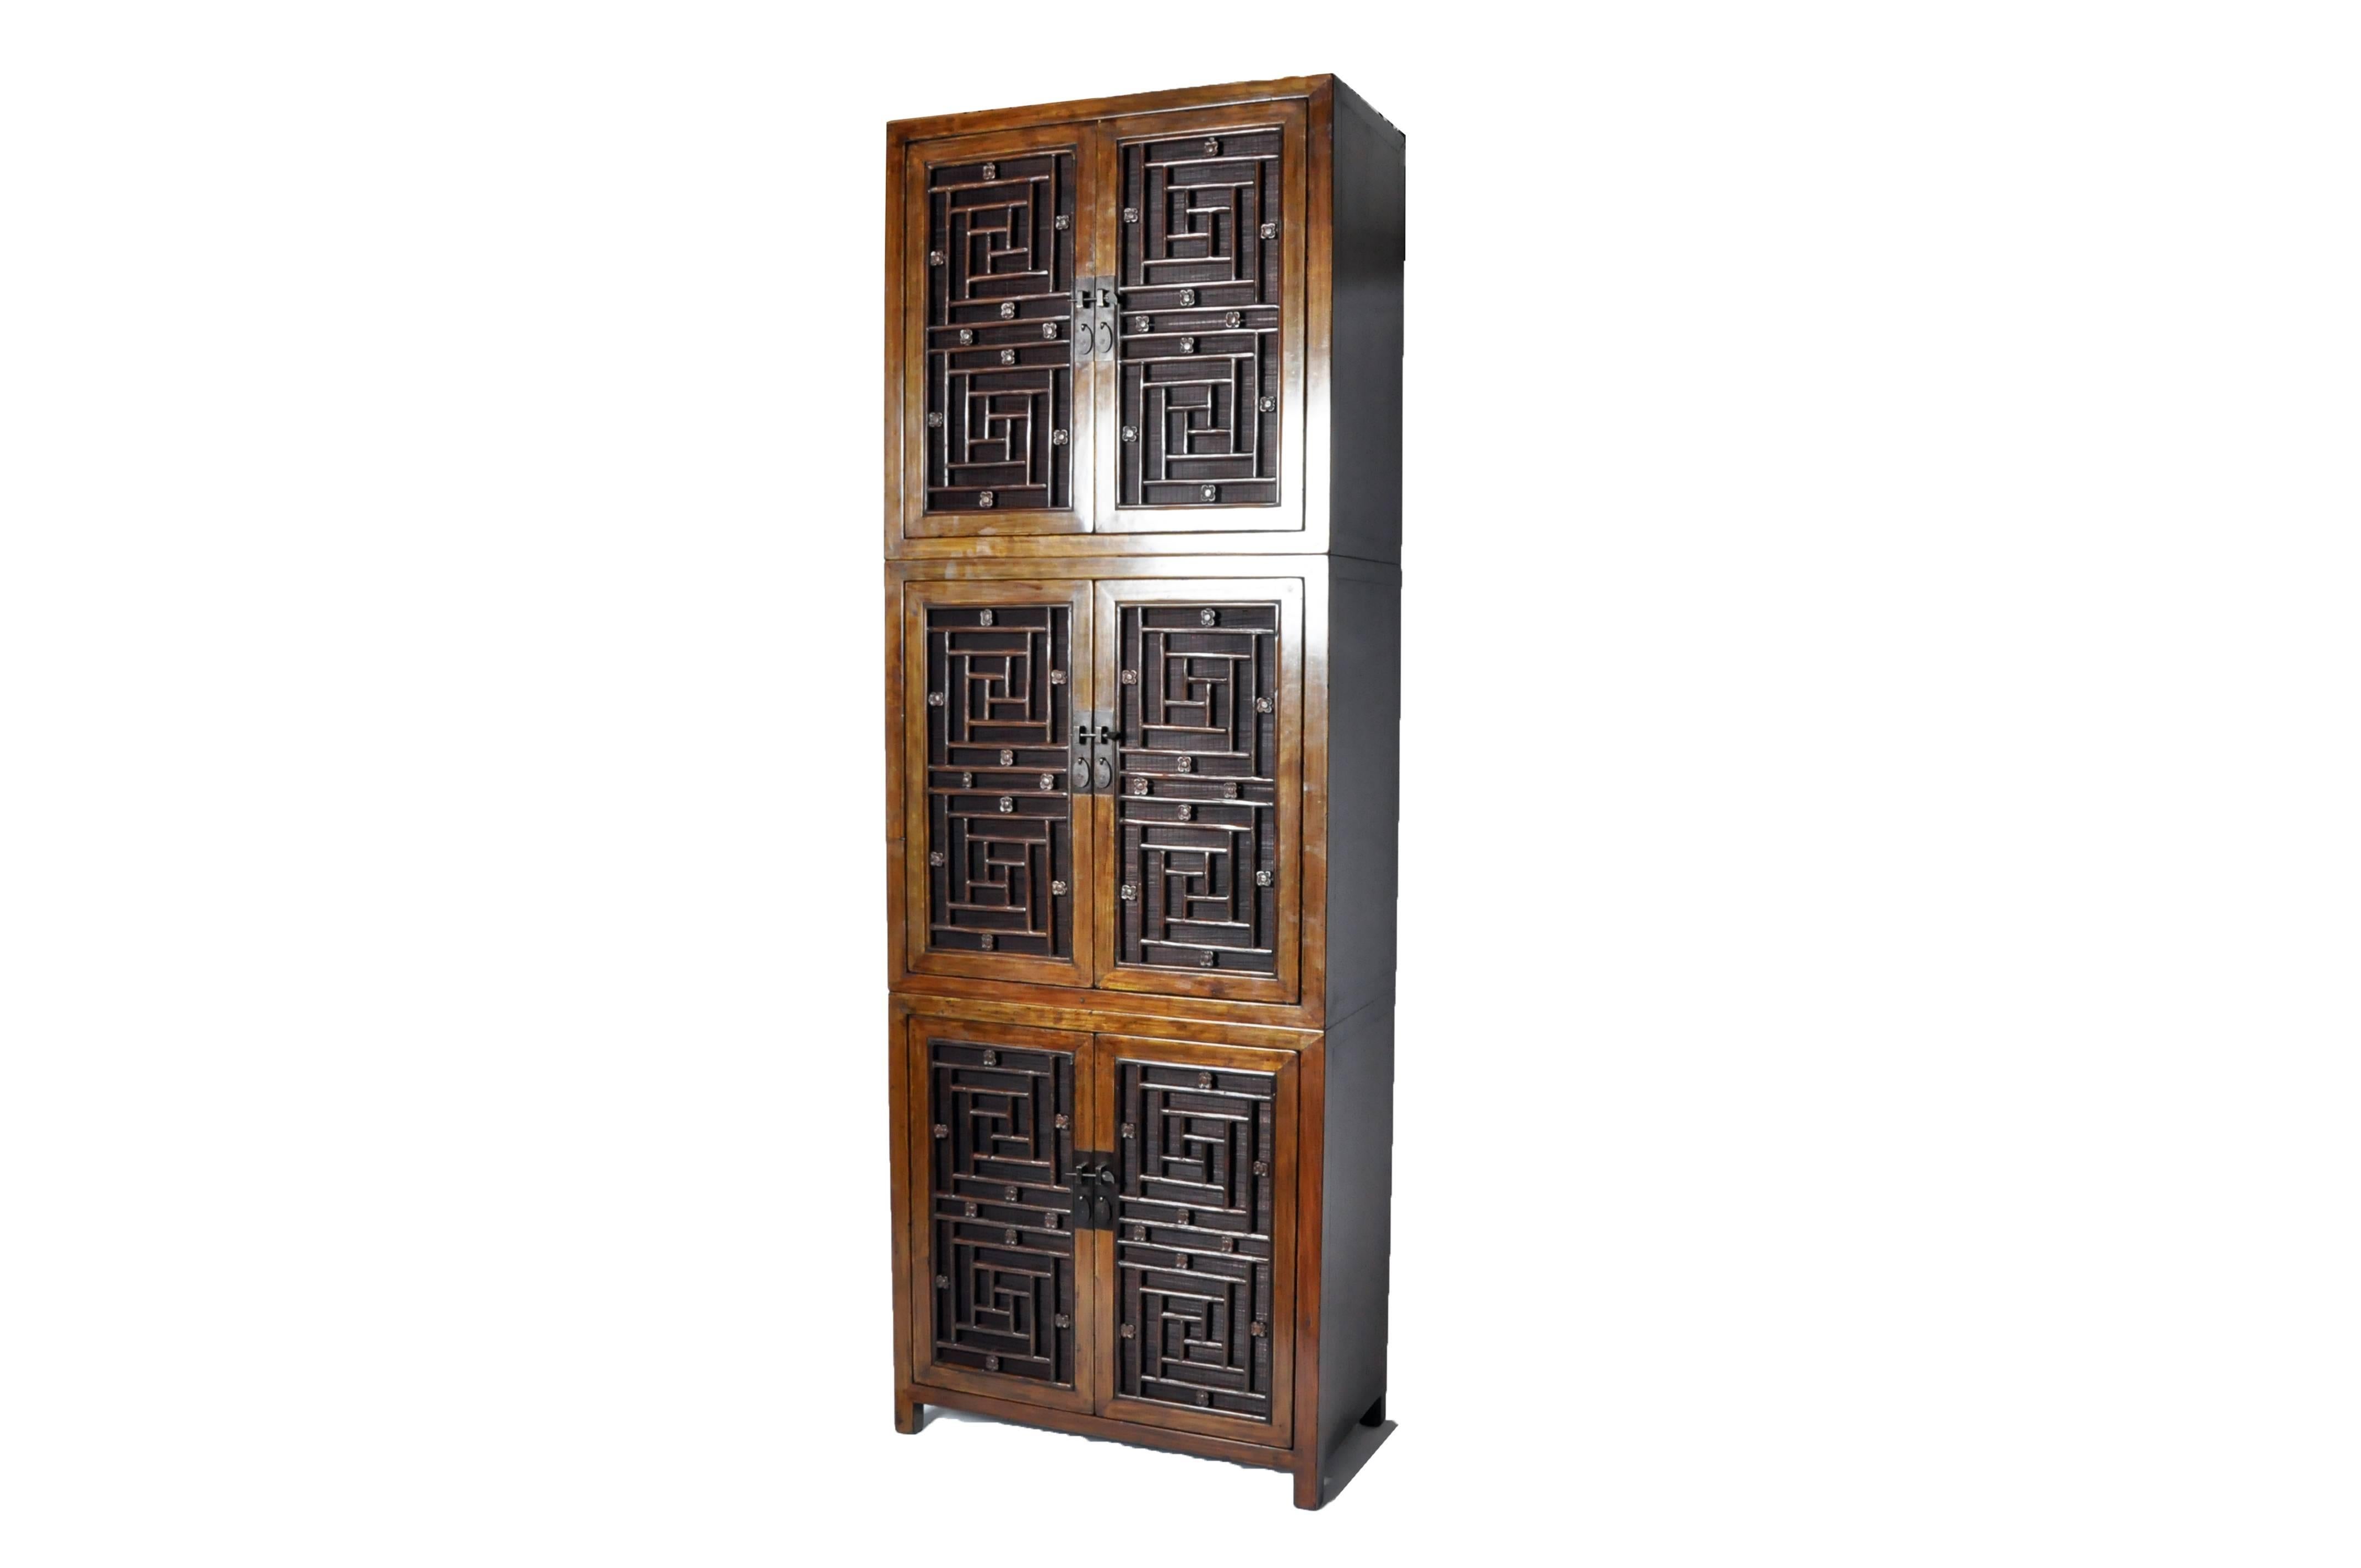 This tall Chinese lattice door cabinet is made from cypress wood and has been fully restored. It features three shelves for ample storage.